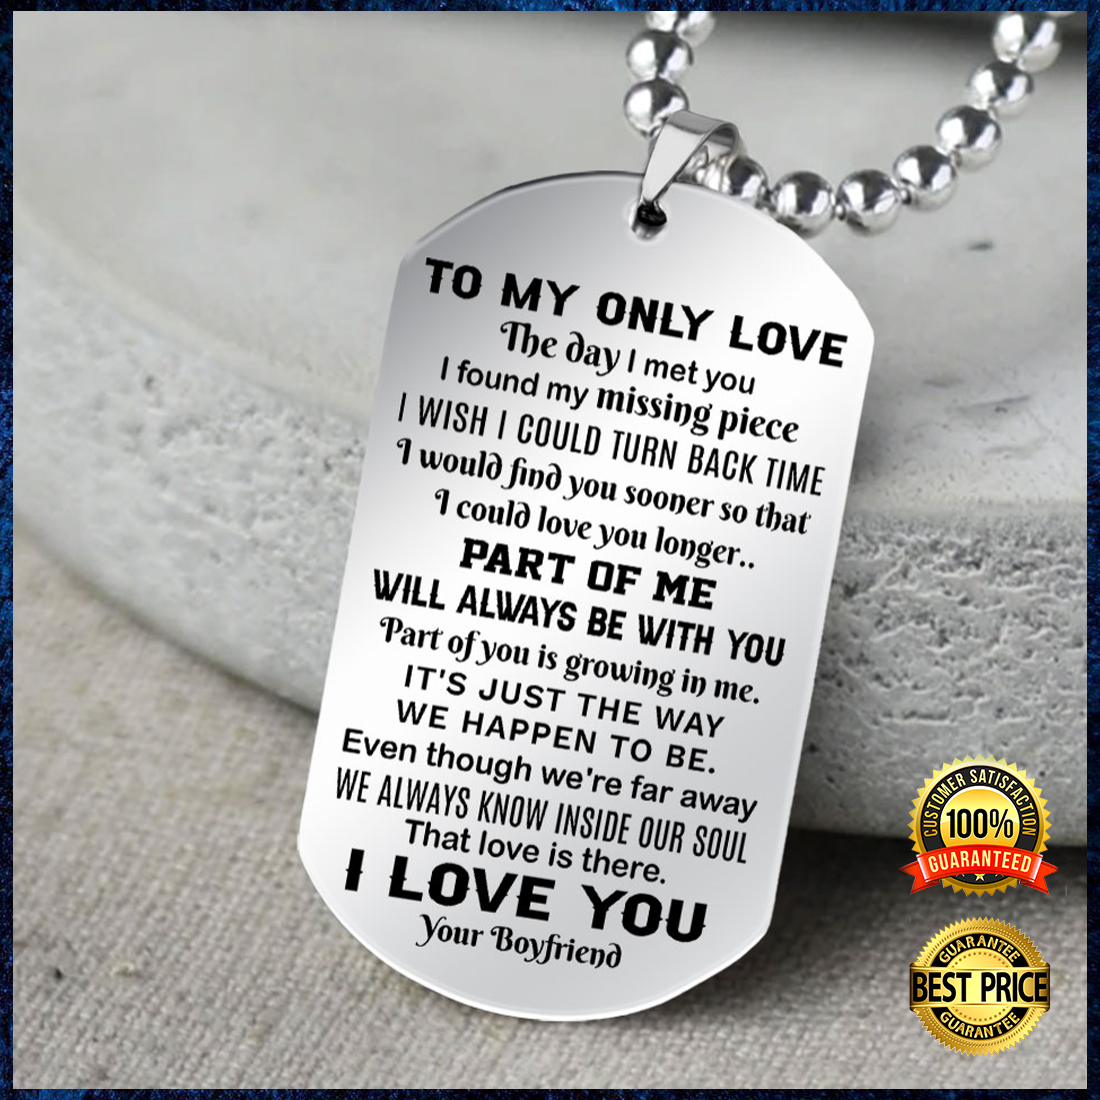 To my only love the day i met you i found my missing piece dog tag 1 4